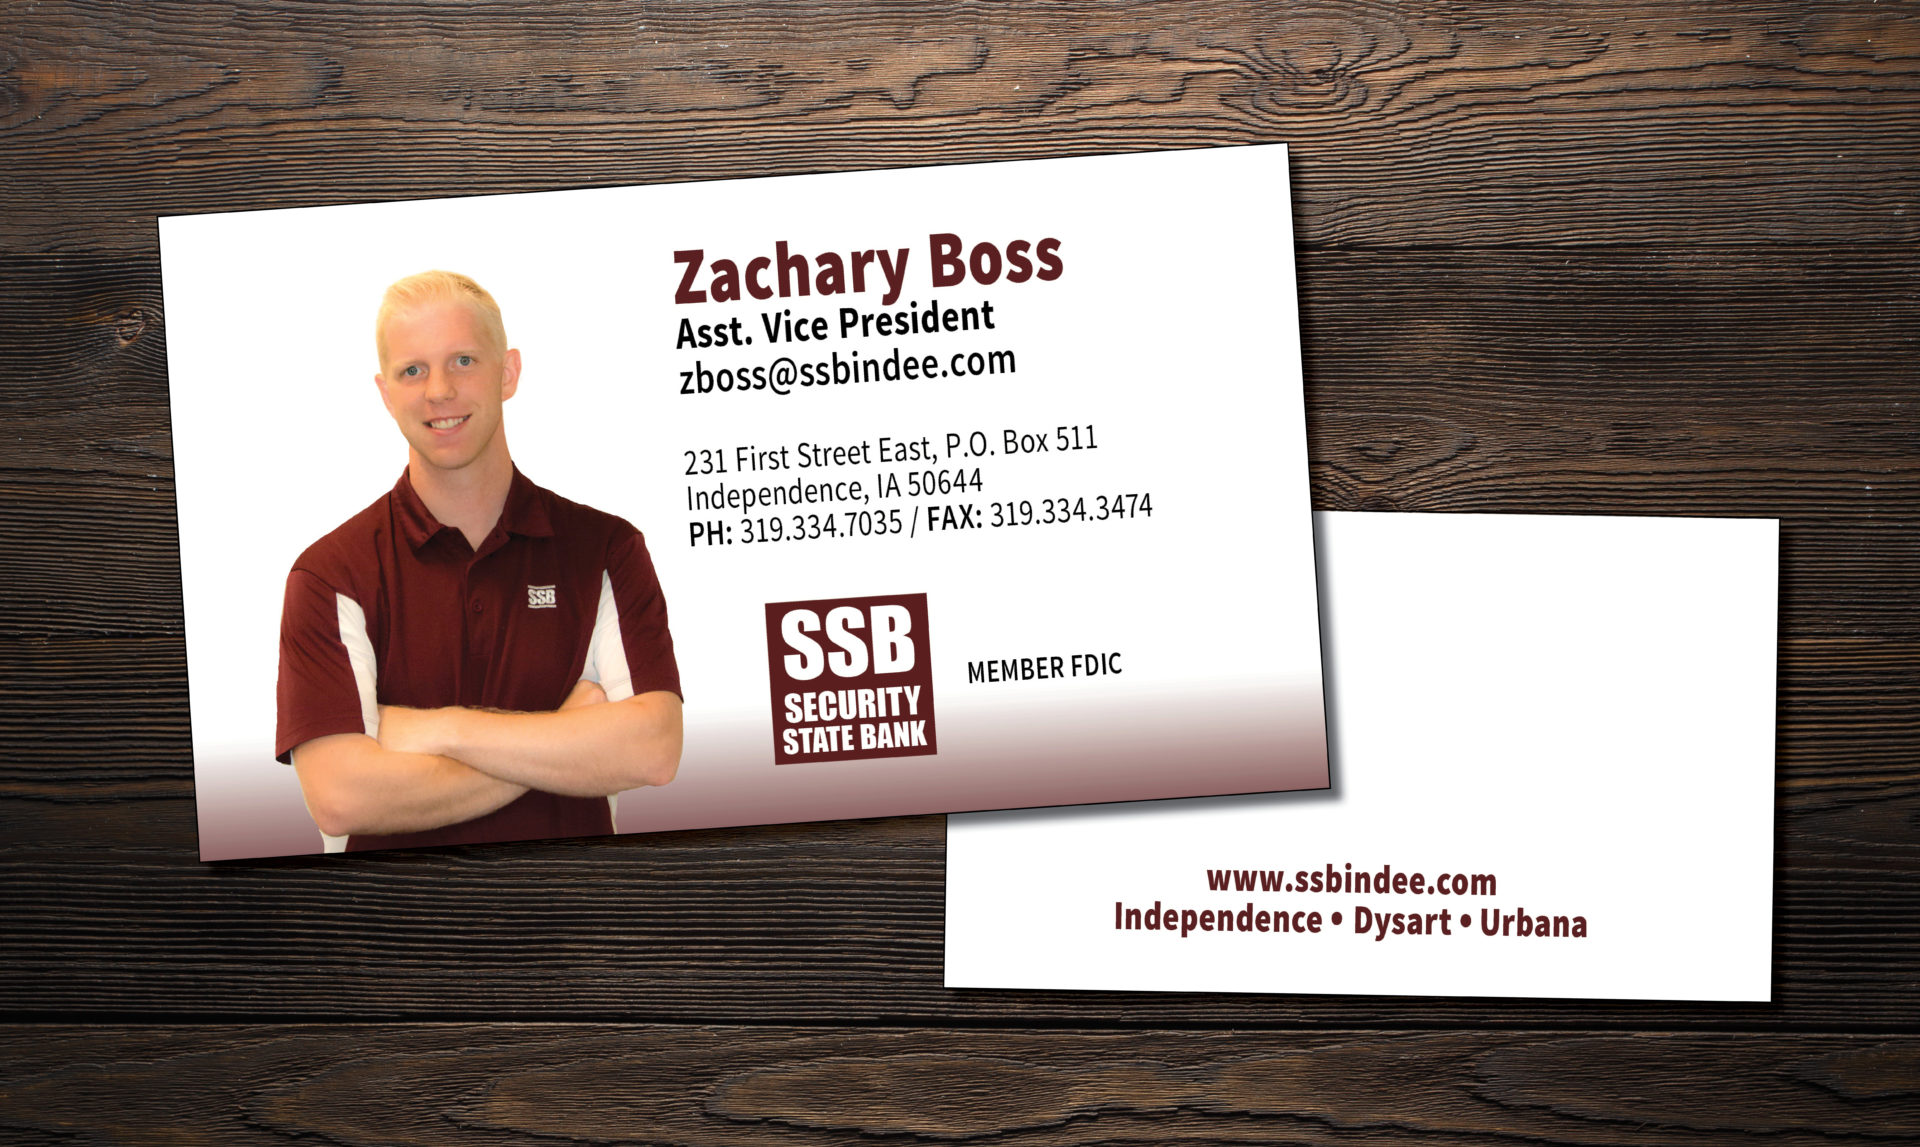 sample business cards